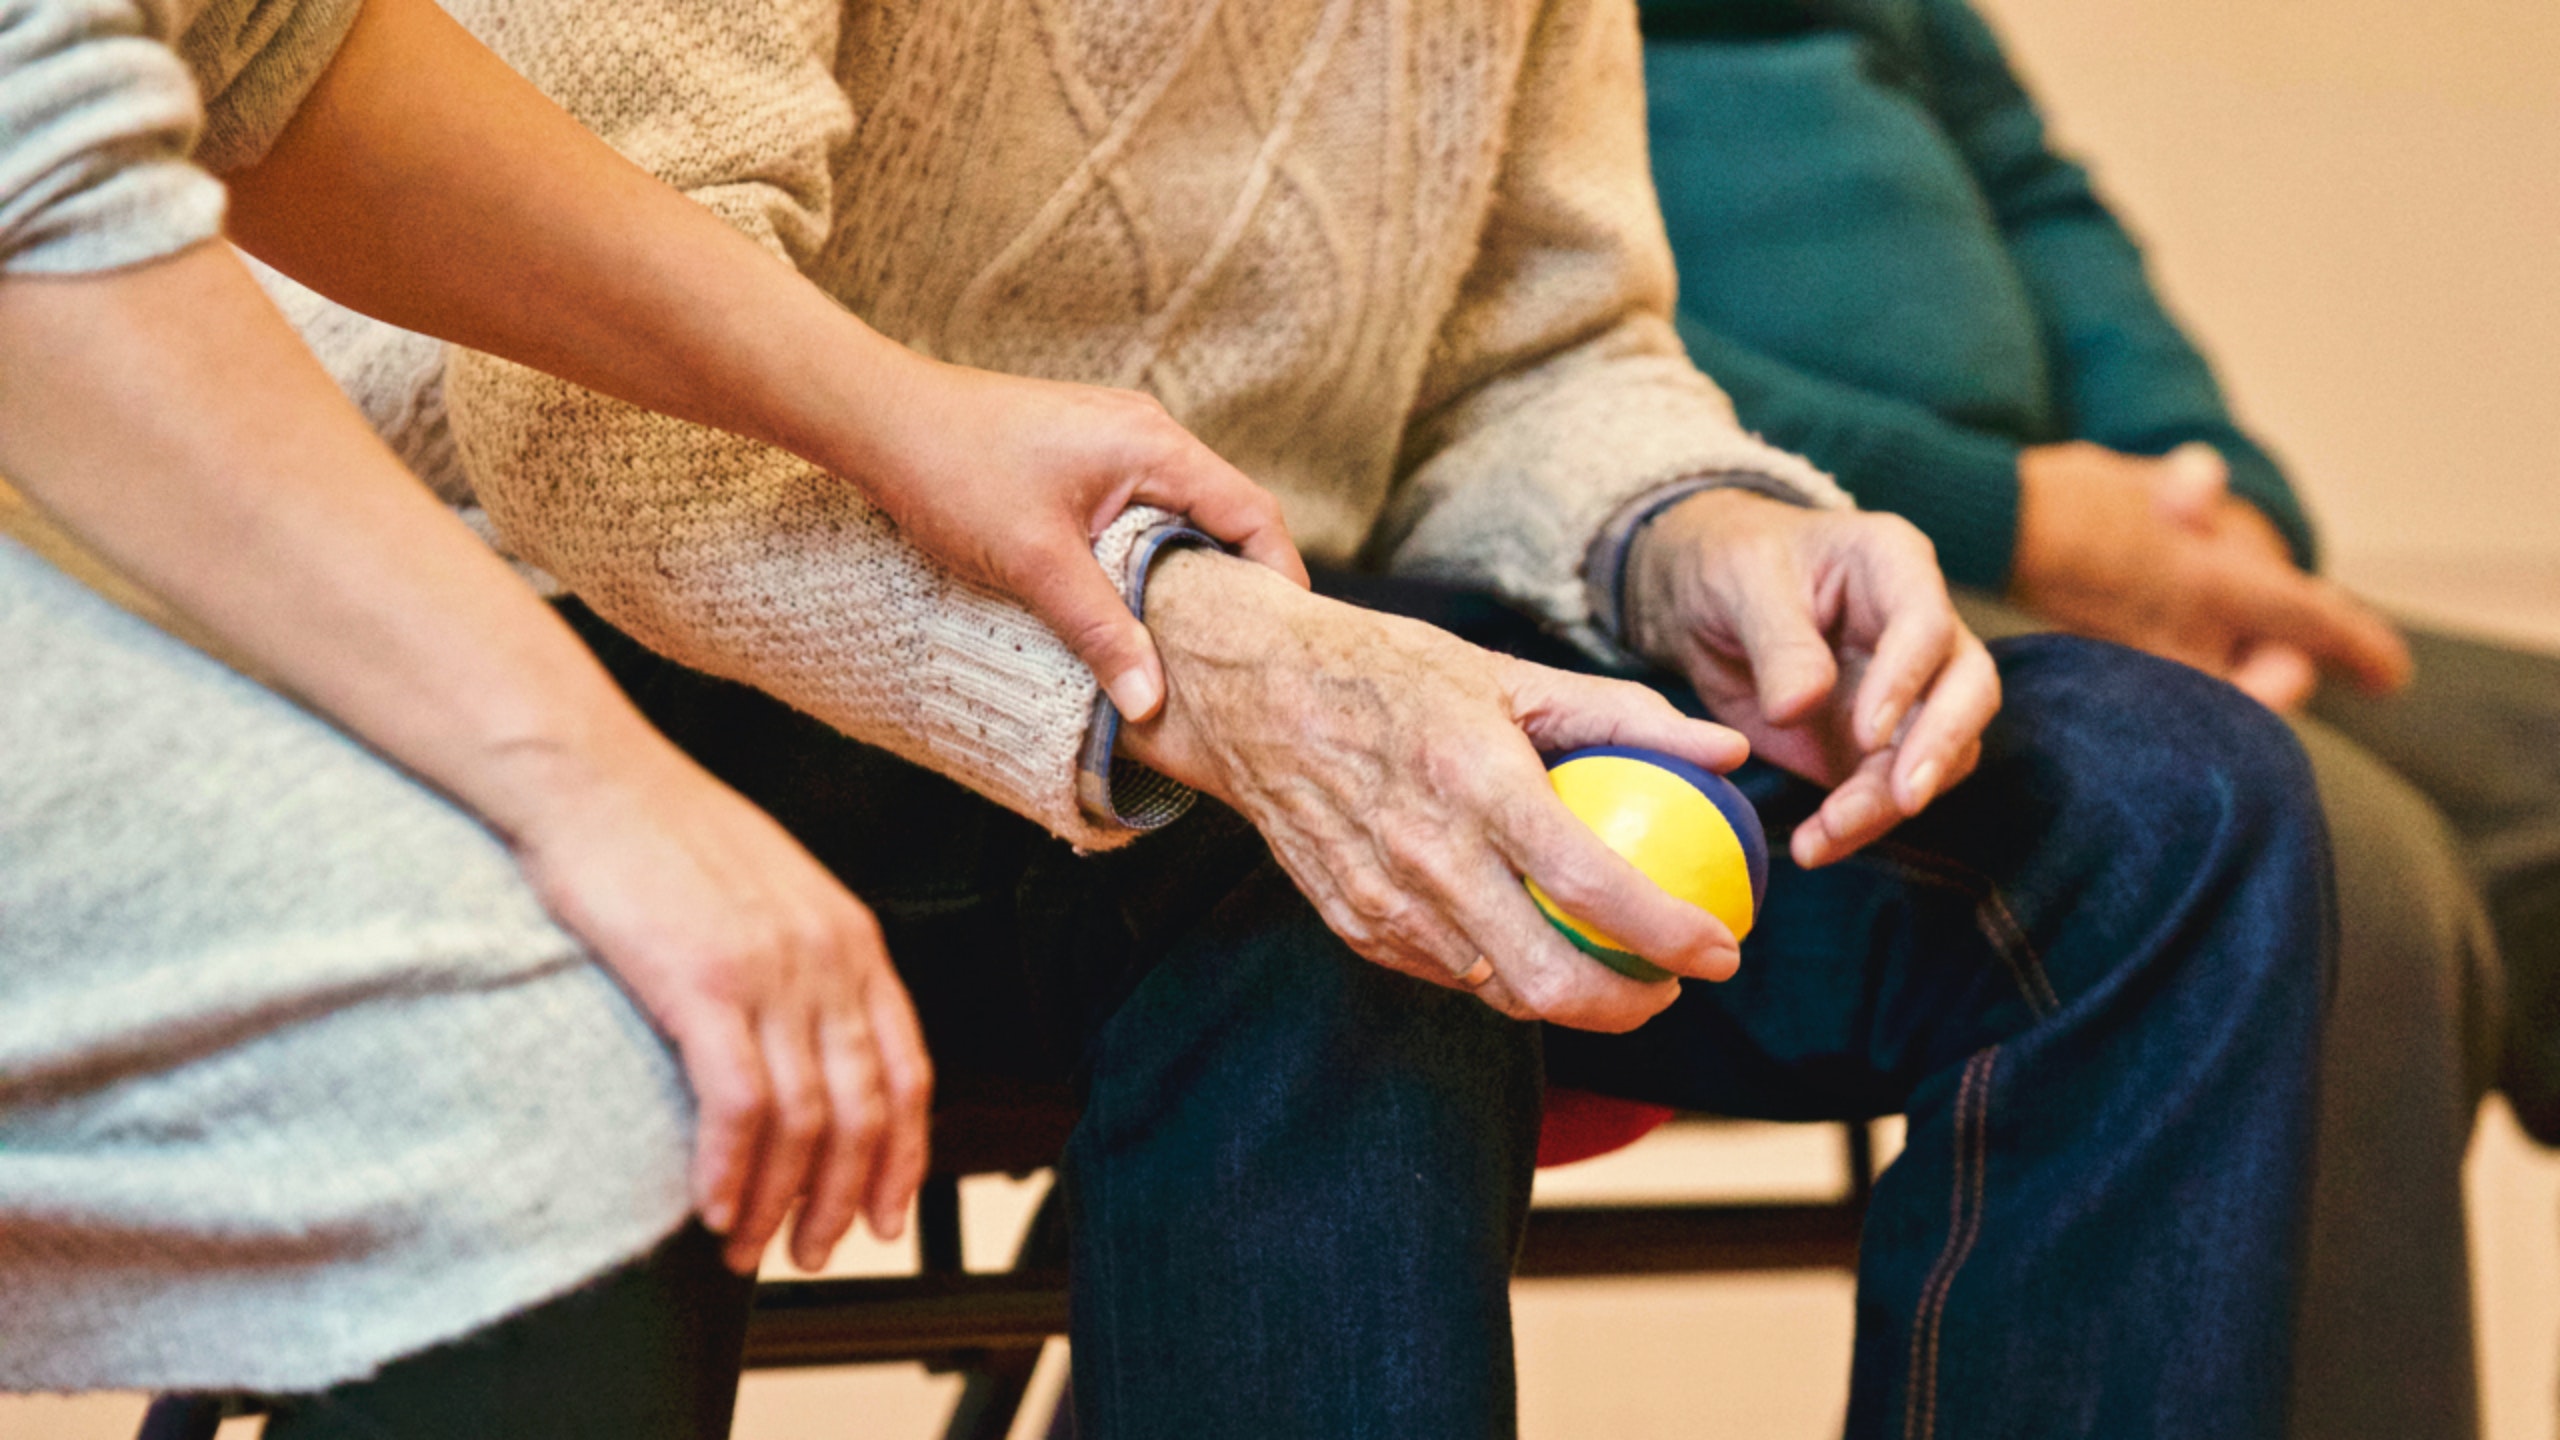 Introduction to The Senior Caregiving Industry